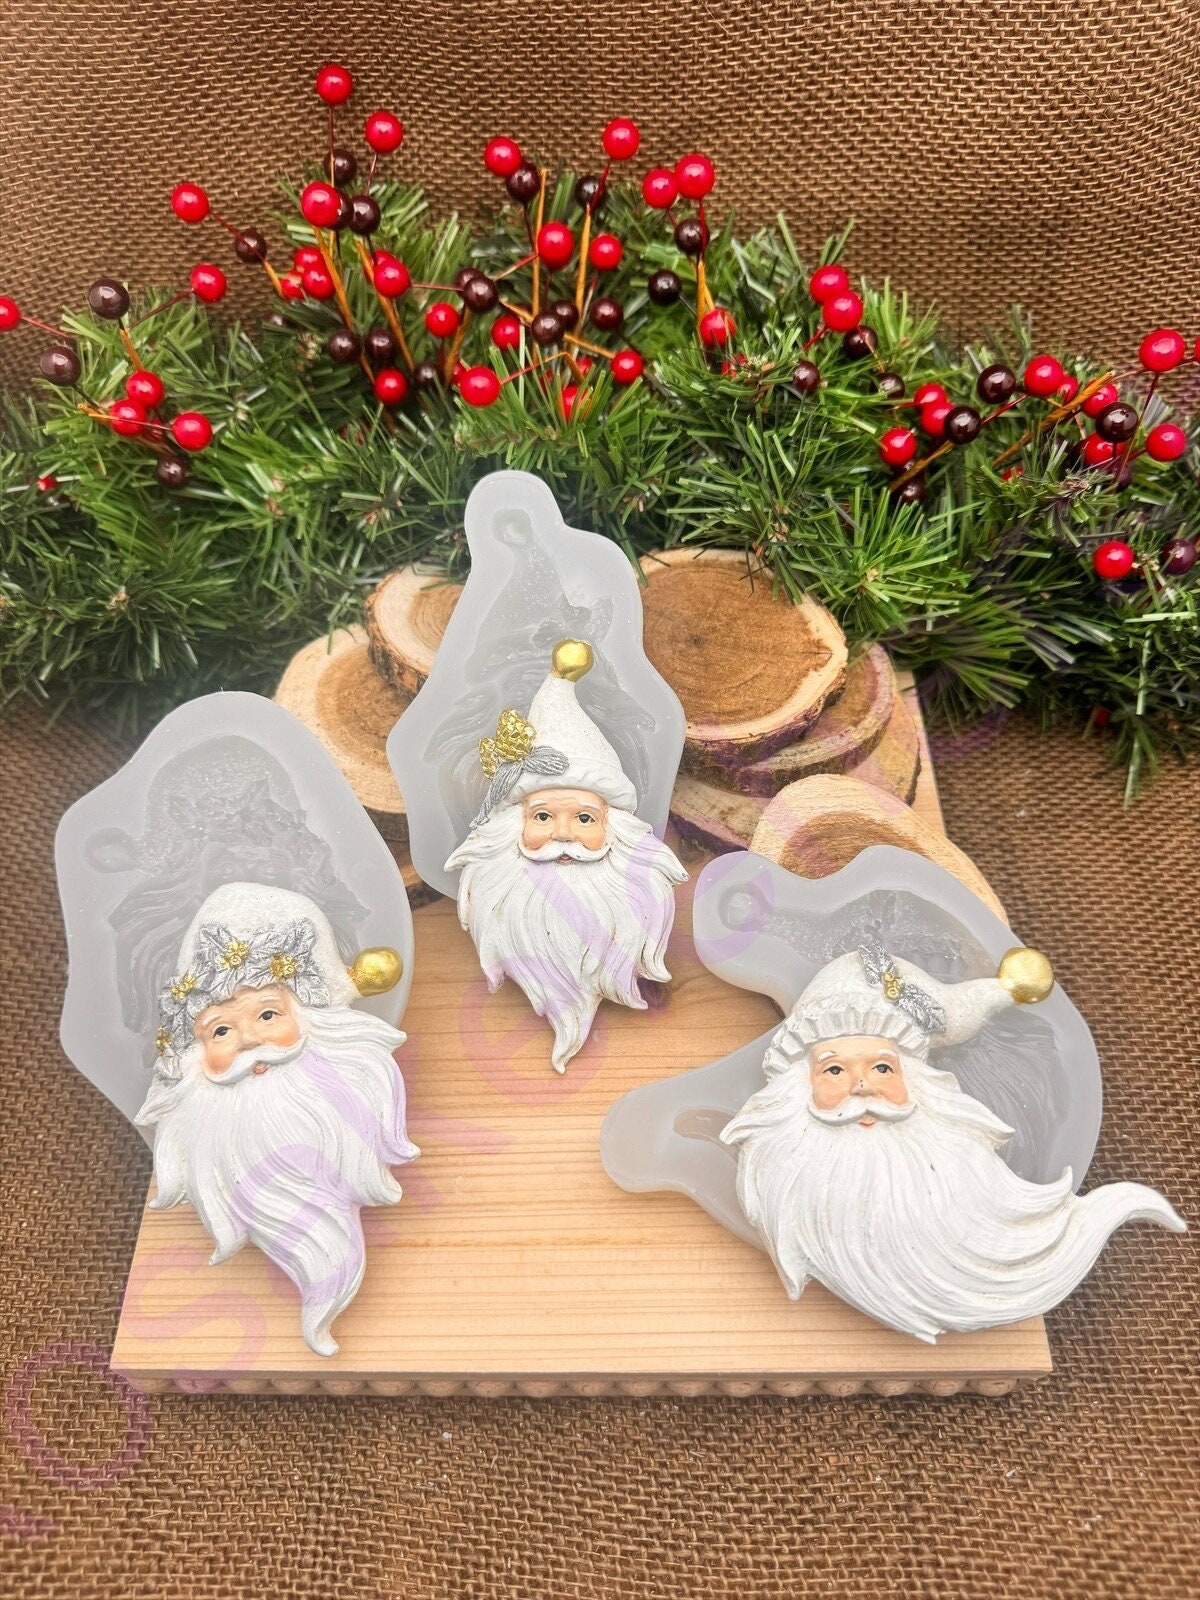 Visland Silicone Christmas Cookie Mold 3D Reindeer/Santa Claus/Snowman  Shaped Fondant Mold Cake/Cupcake Decorating Mould for Handmade Candy